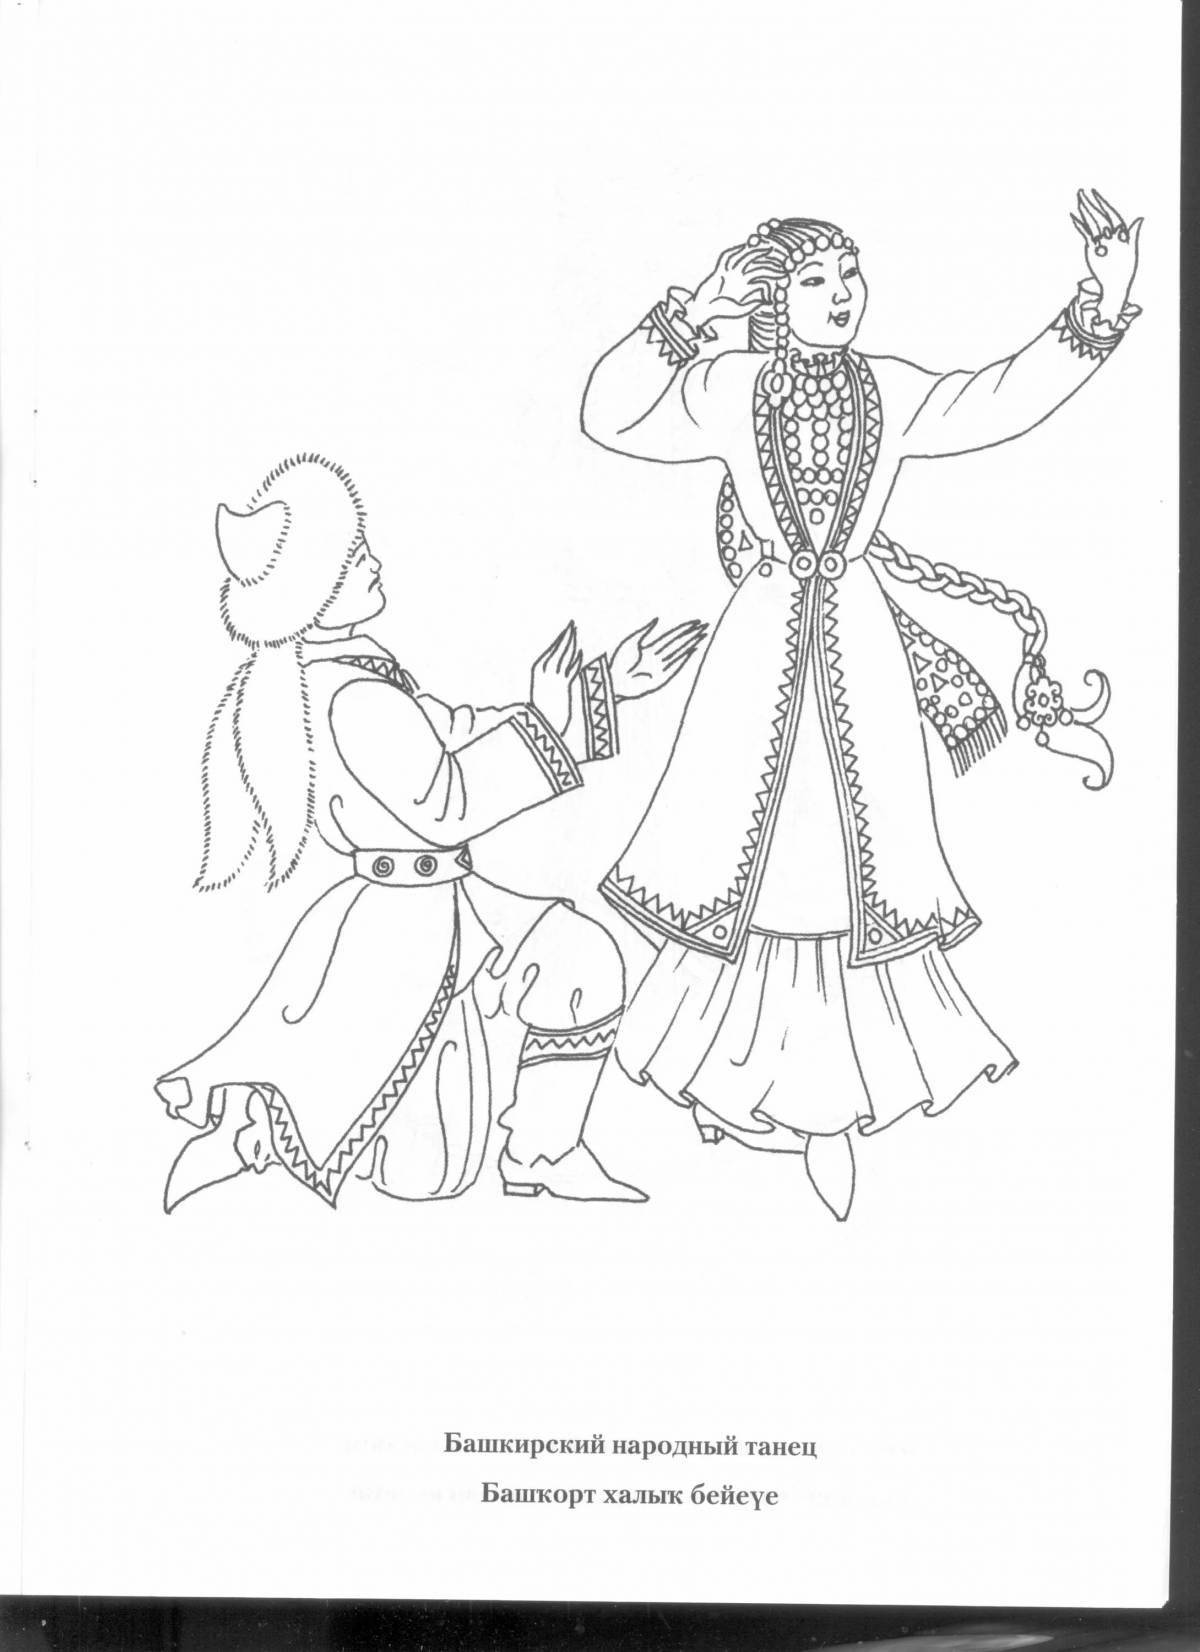 Exquisite nauryz coloring book for the little ones